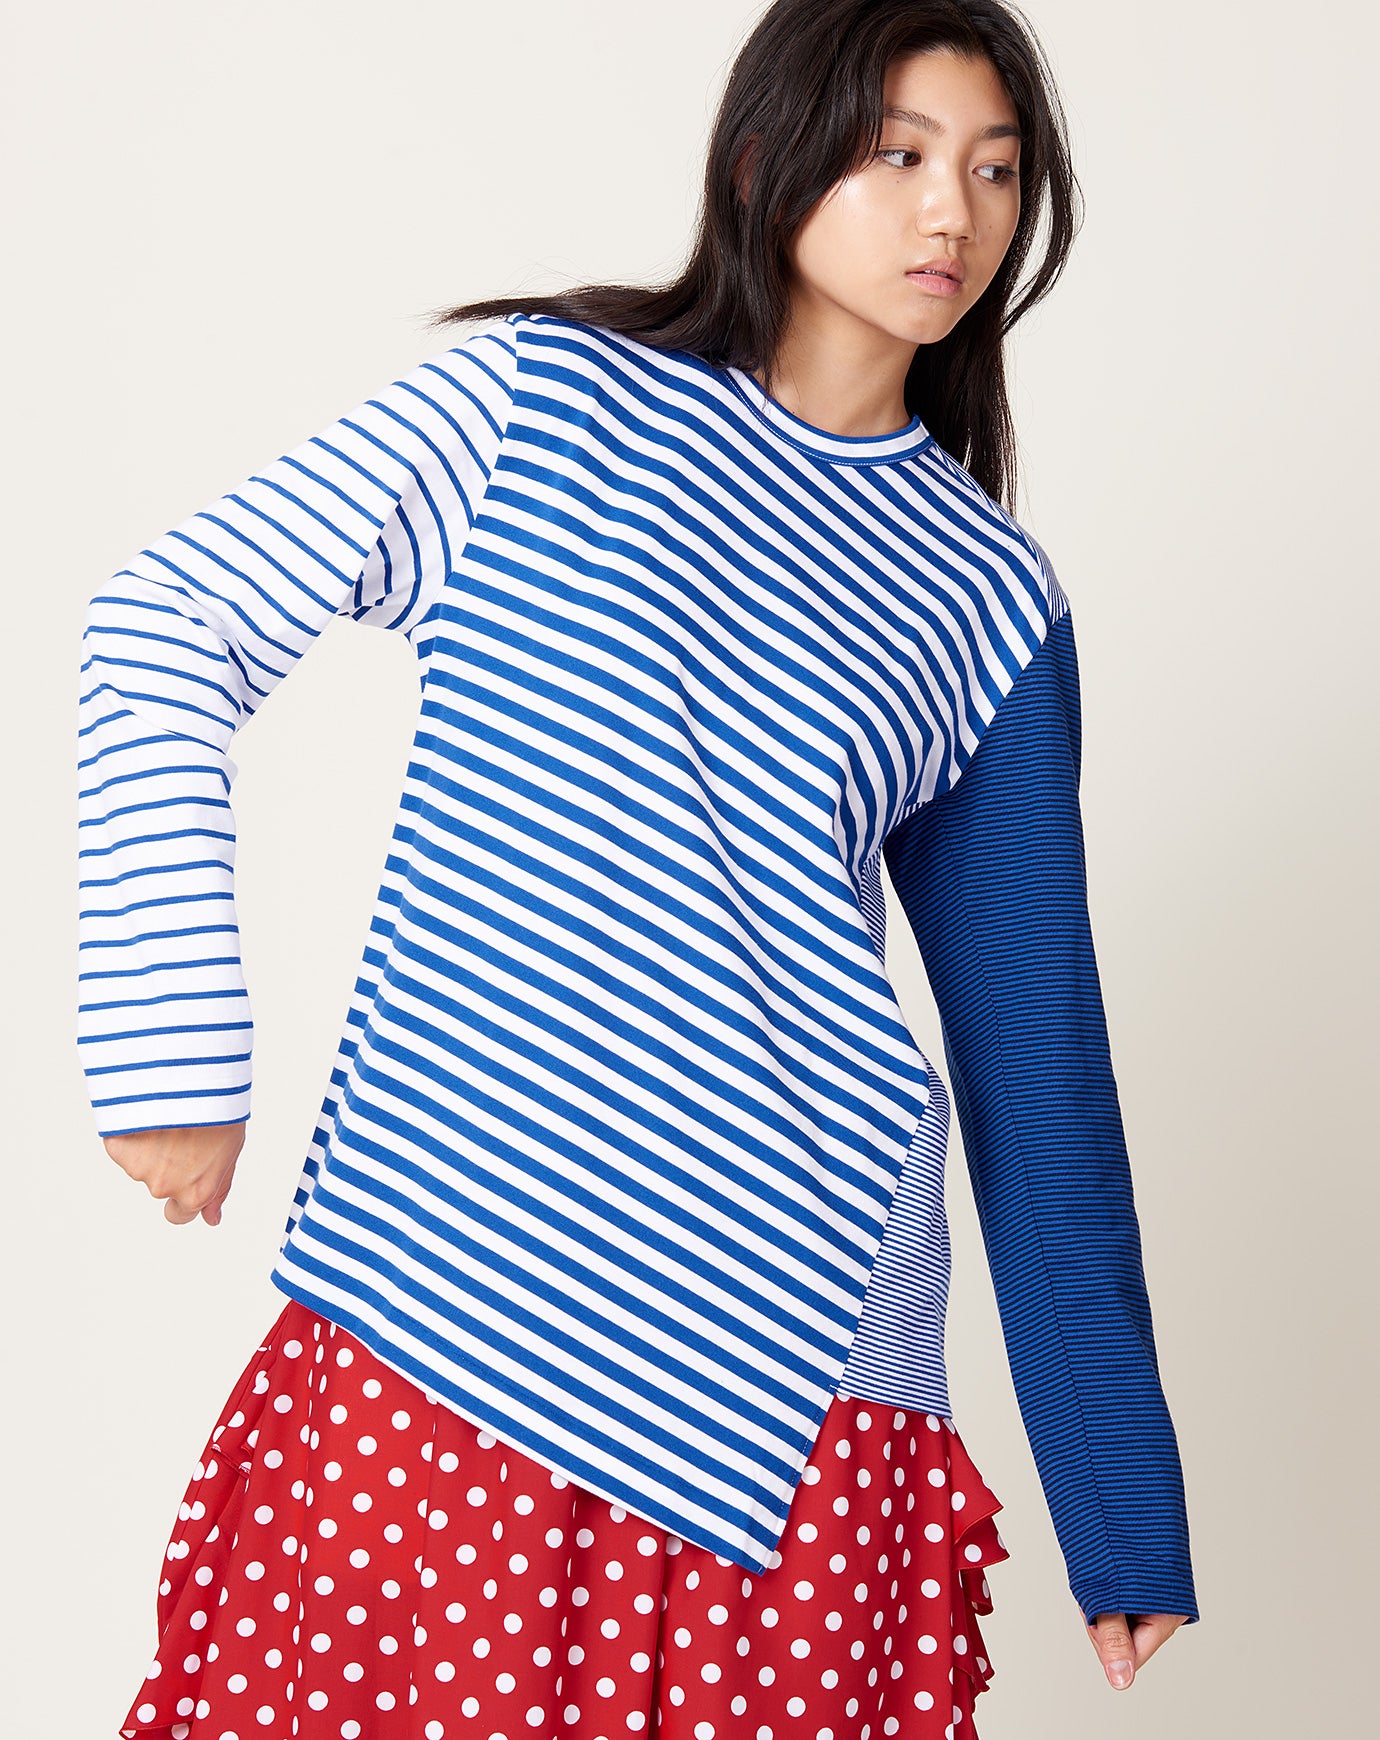 Jersey Striped Colored Top in Blue